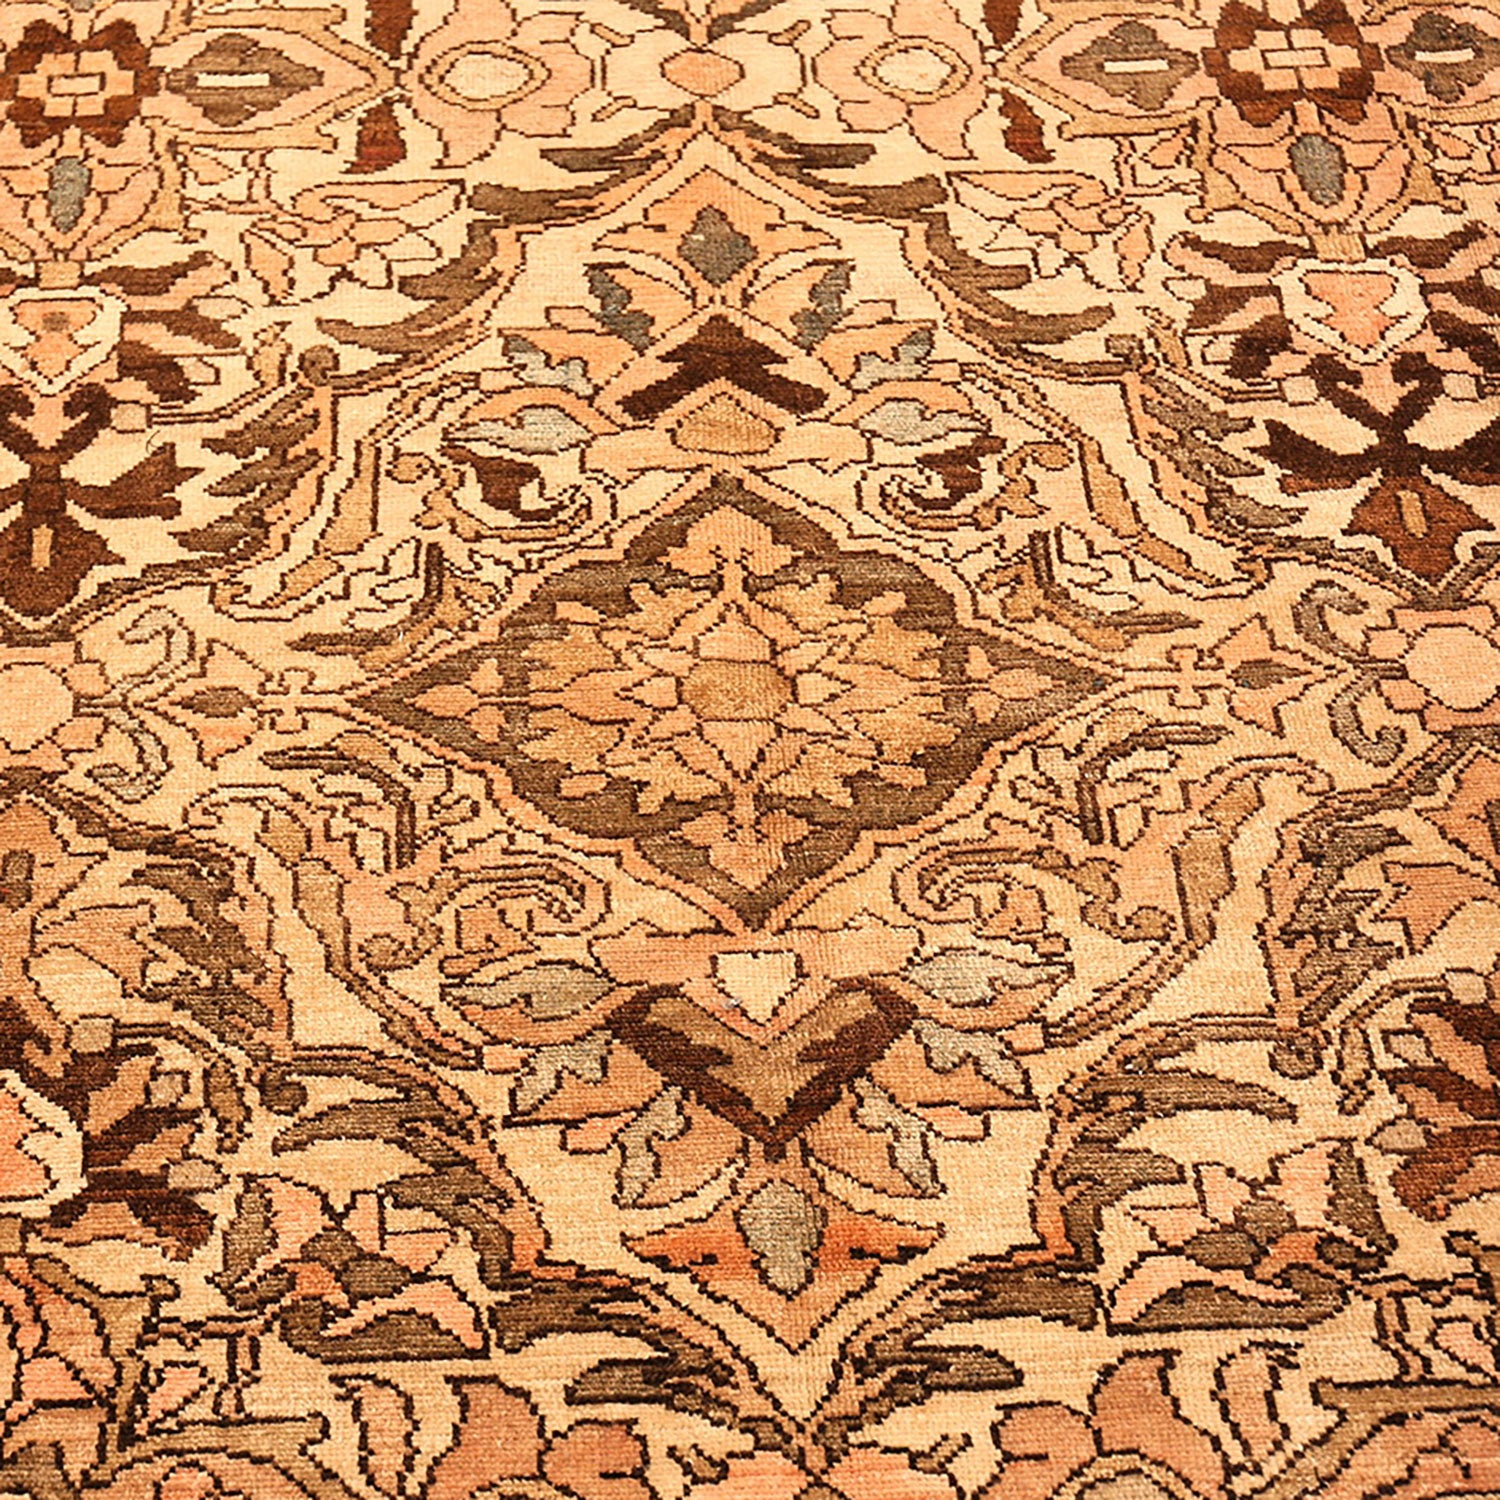 Close-up of an ornate Persian-inspired carpet with intricate symmetrical design.